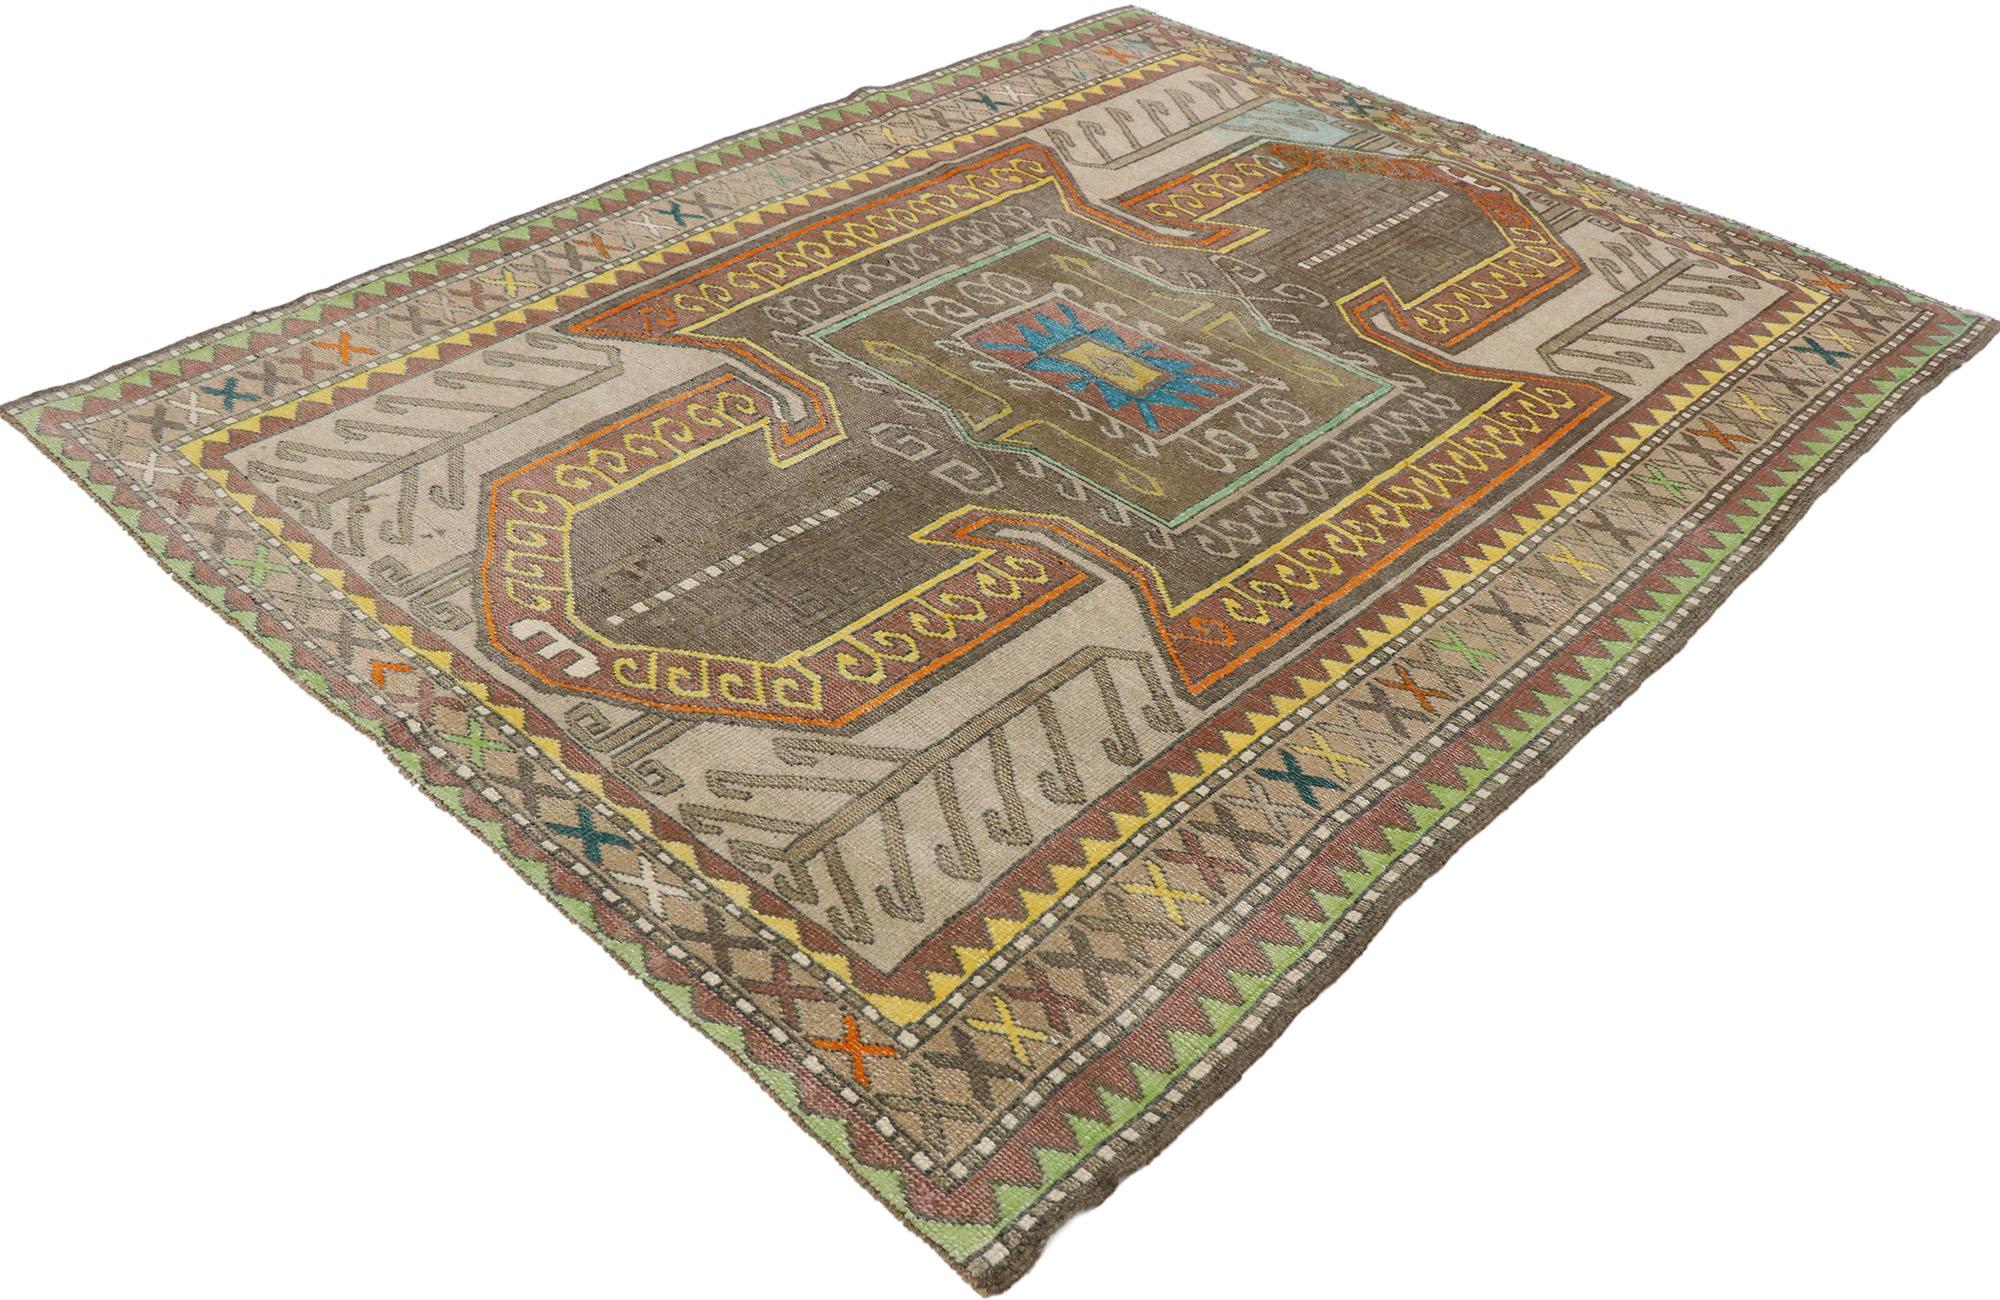 53257, vintage Turkish Kars rug with Postmodern Caucasian Tribal style. Balancing tribal style and traditional sensibility with a splash of painted colors, this hand knotted wool vintage Turkish Kars rug is an amalgam of Caucasian influence. The